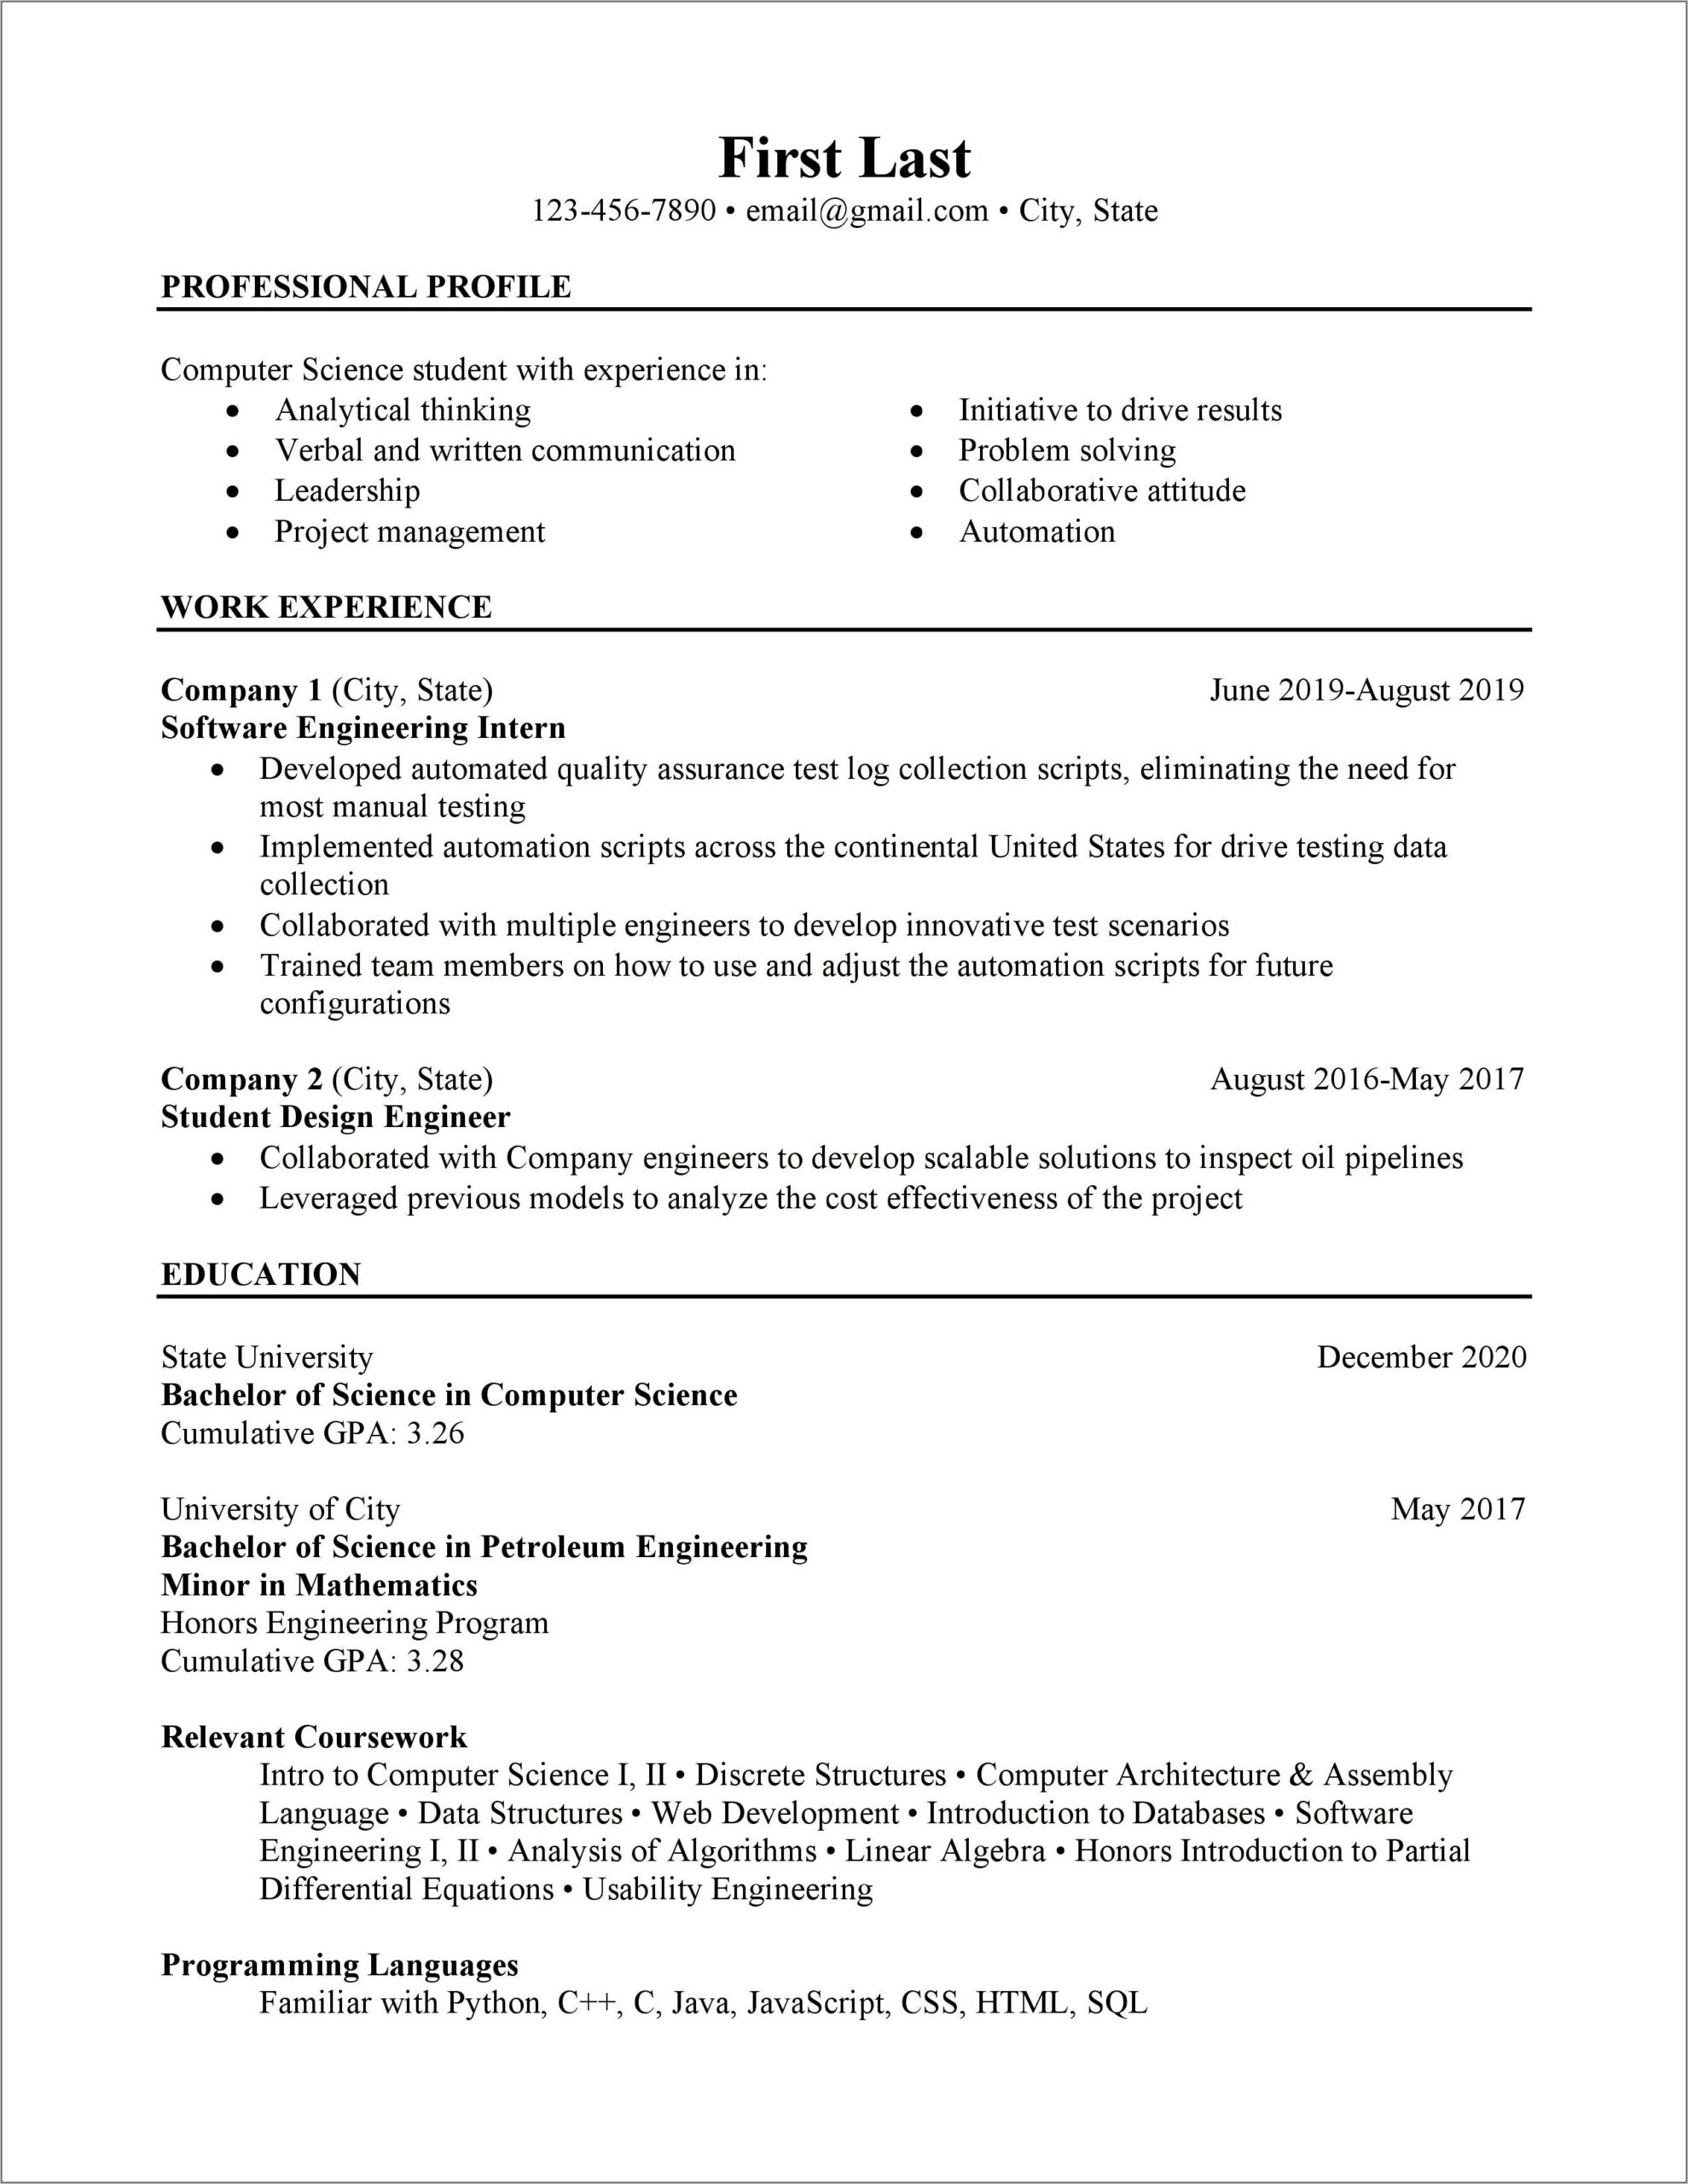 Best Resume Format For Computer Science Students